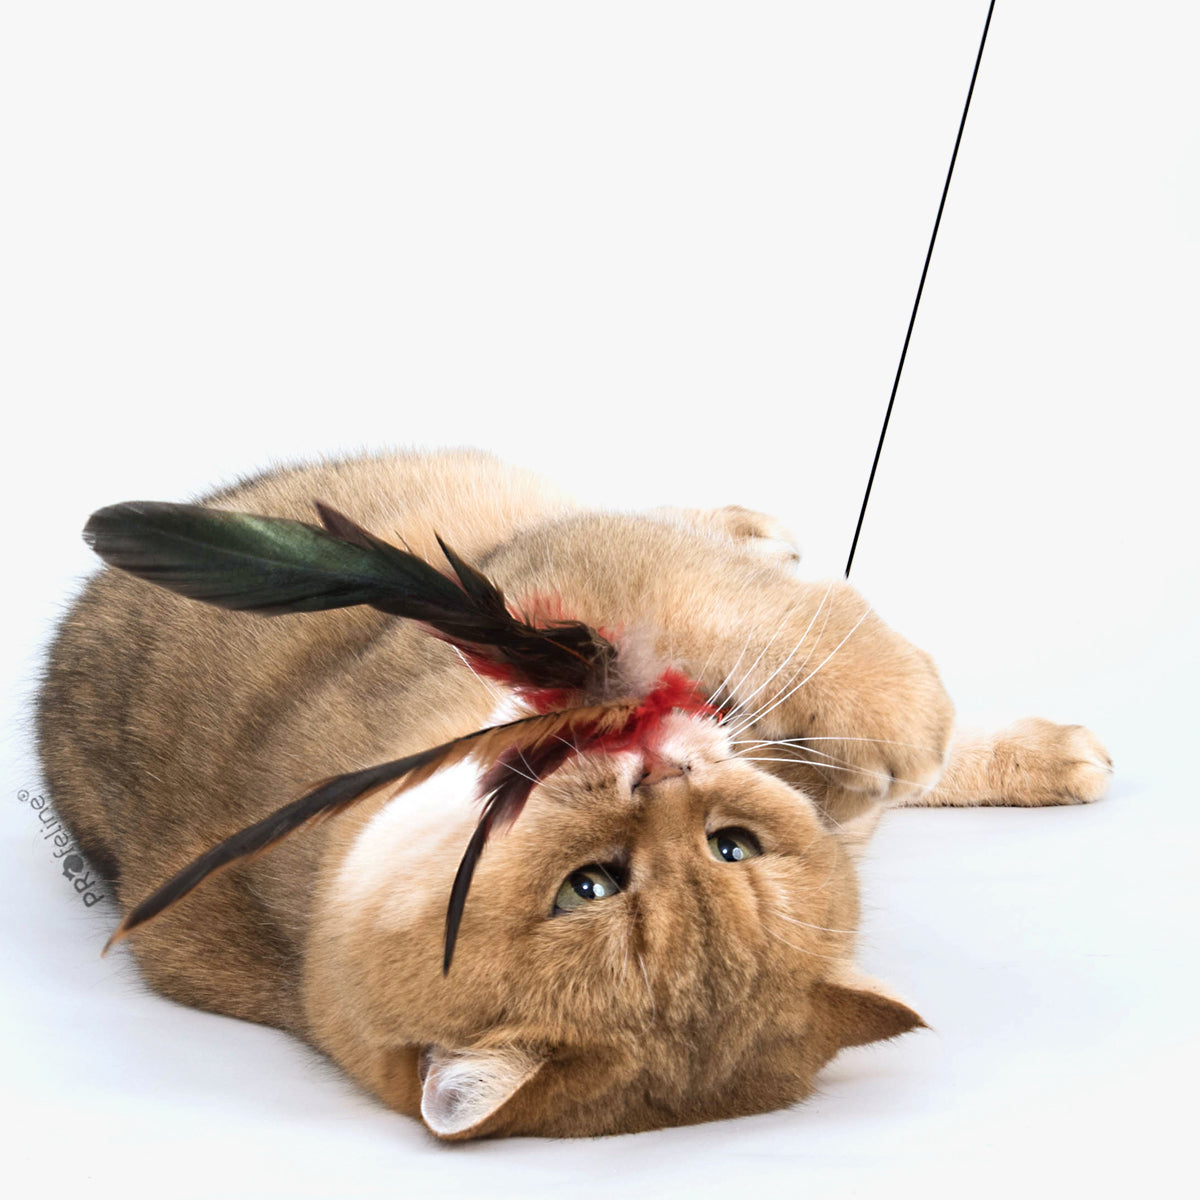 Shop the Best Cat Toys in Australia from Made Moggie's Wide Selection